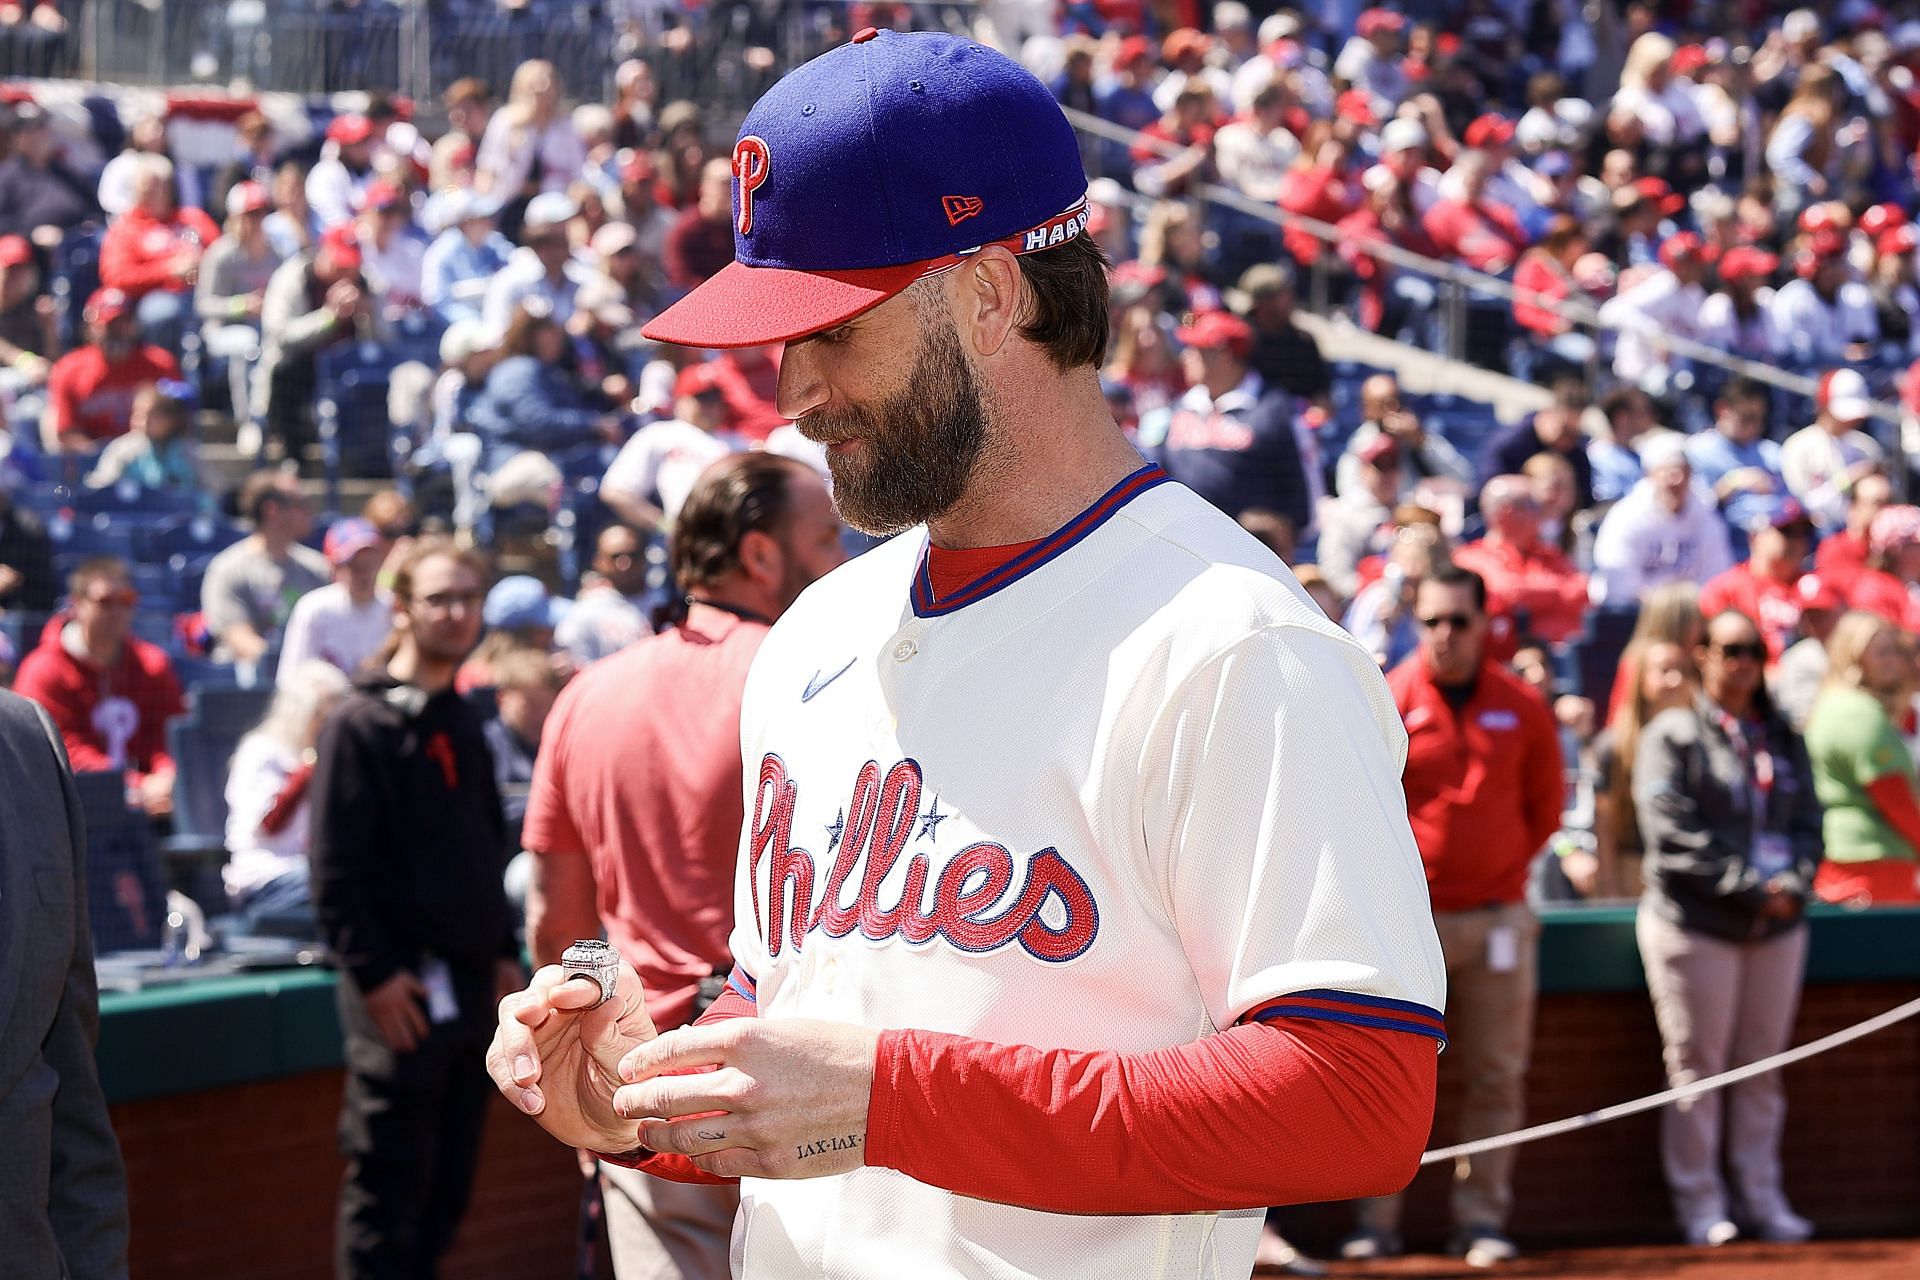 Bryce Harper is on his way back